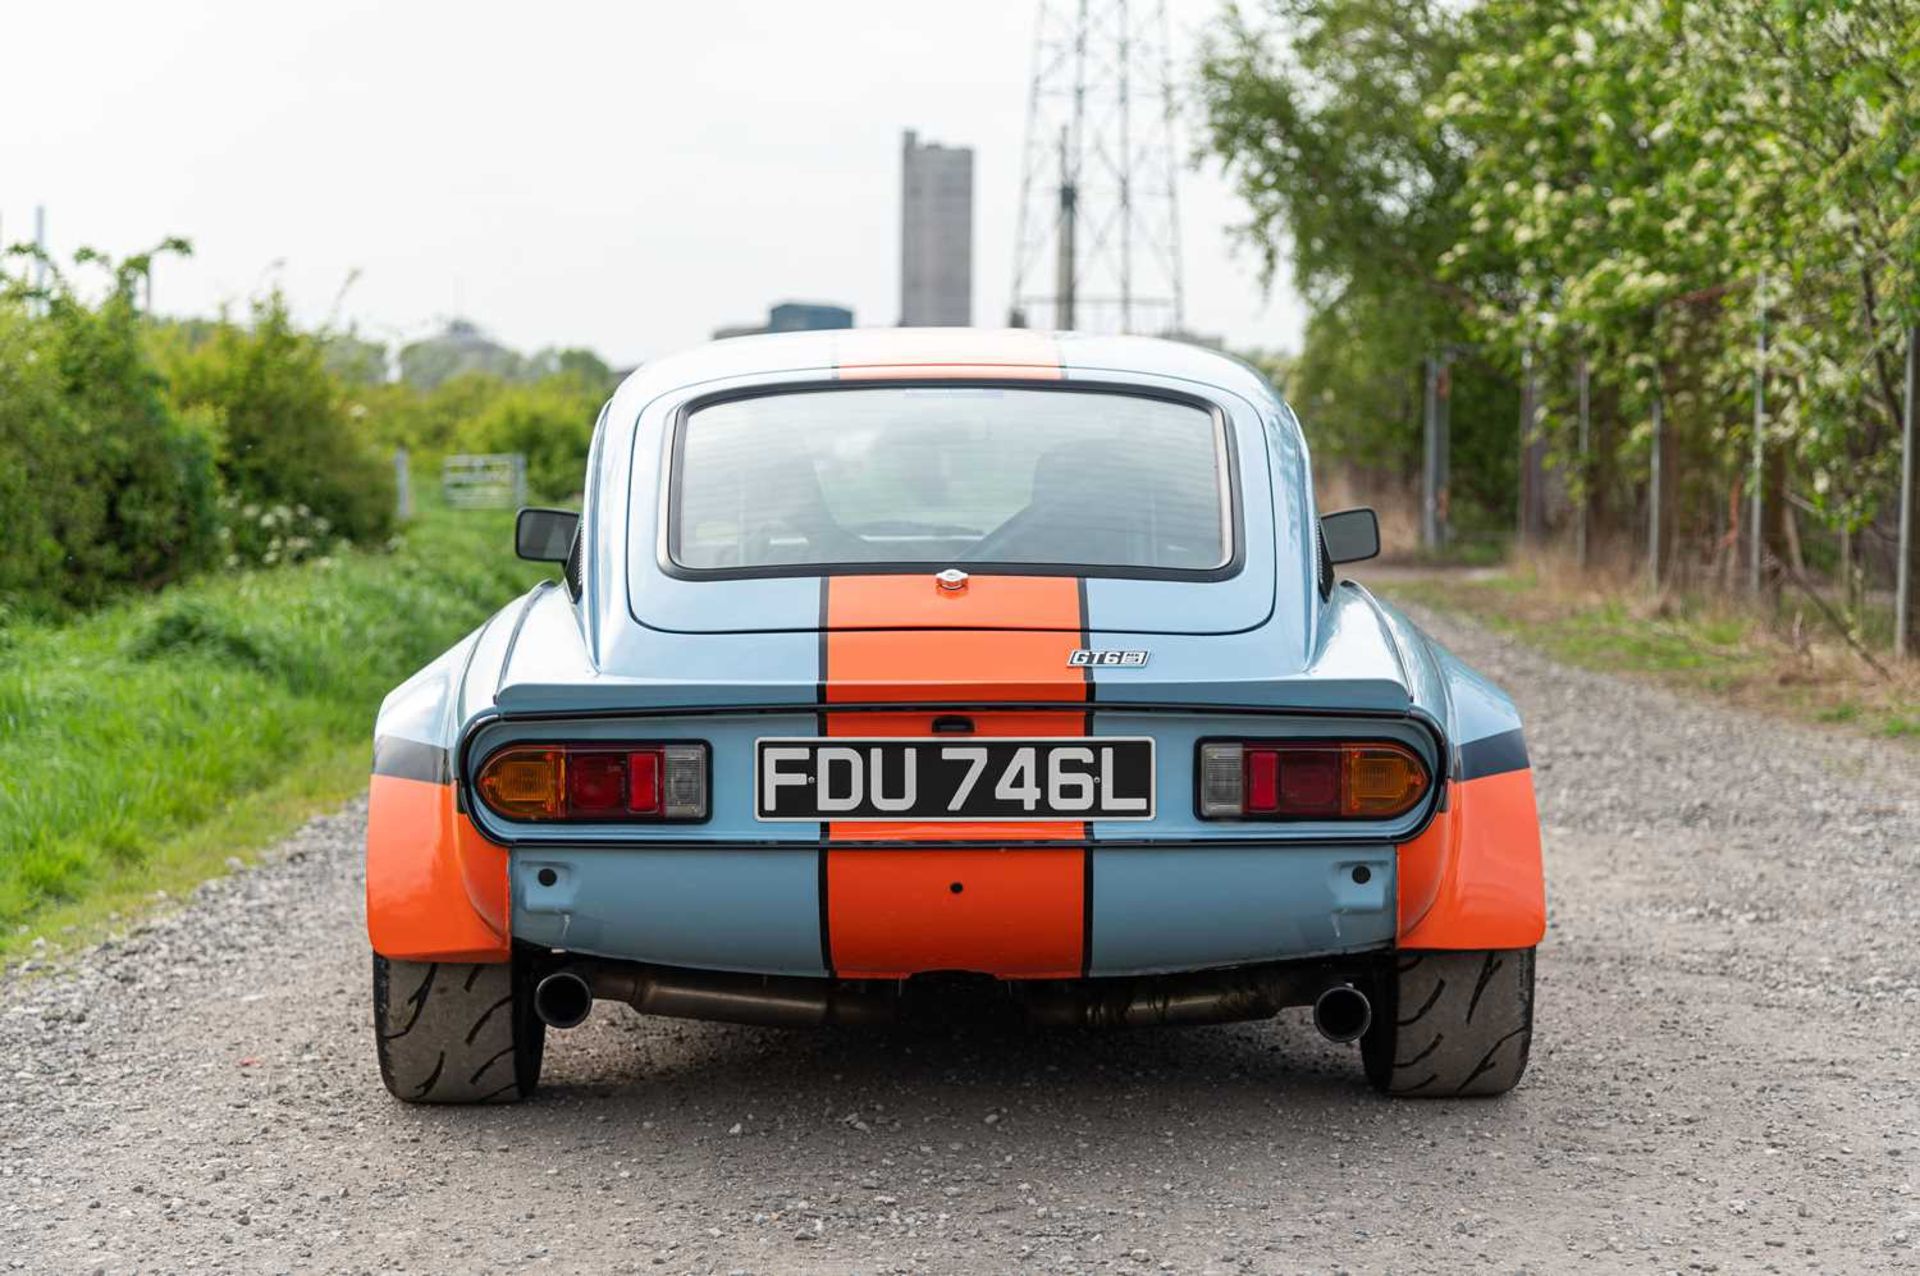 1973 Triumph GT6  ***NO RESERVE*** Presented in Gulf Racing-inspired paintwork, road-going track wea - Bild 11 aus 65